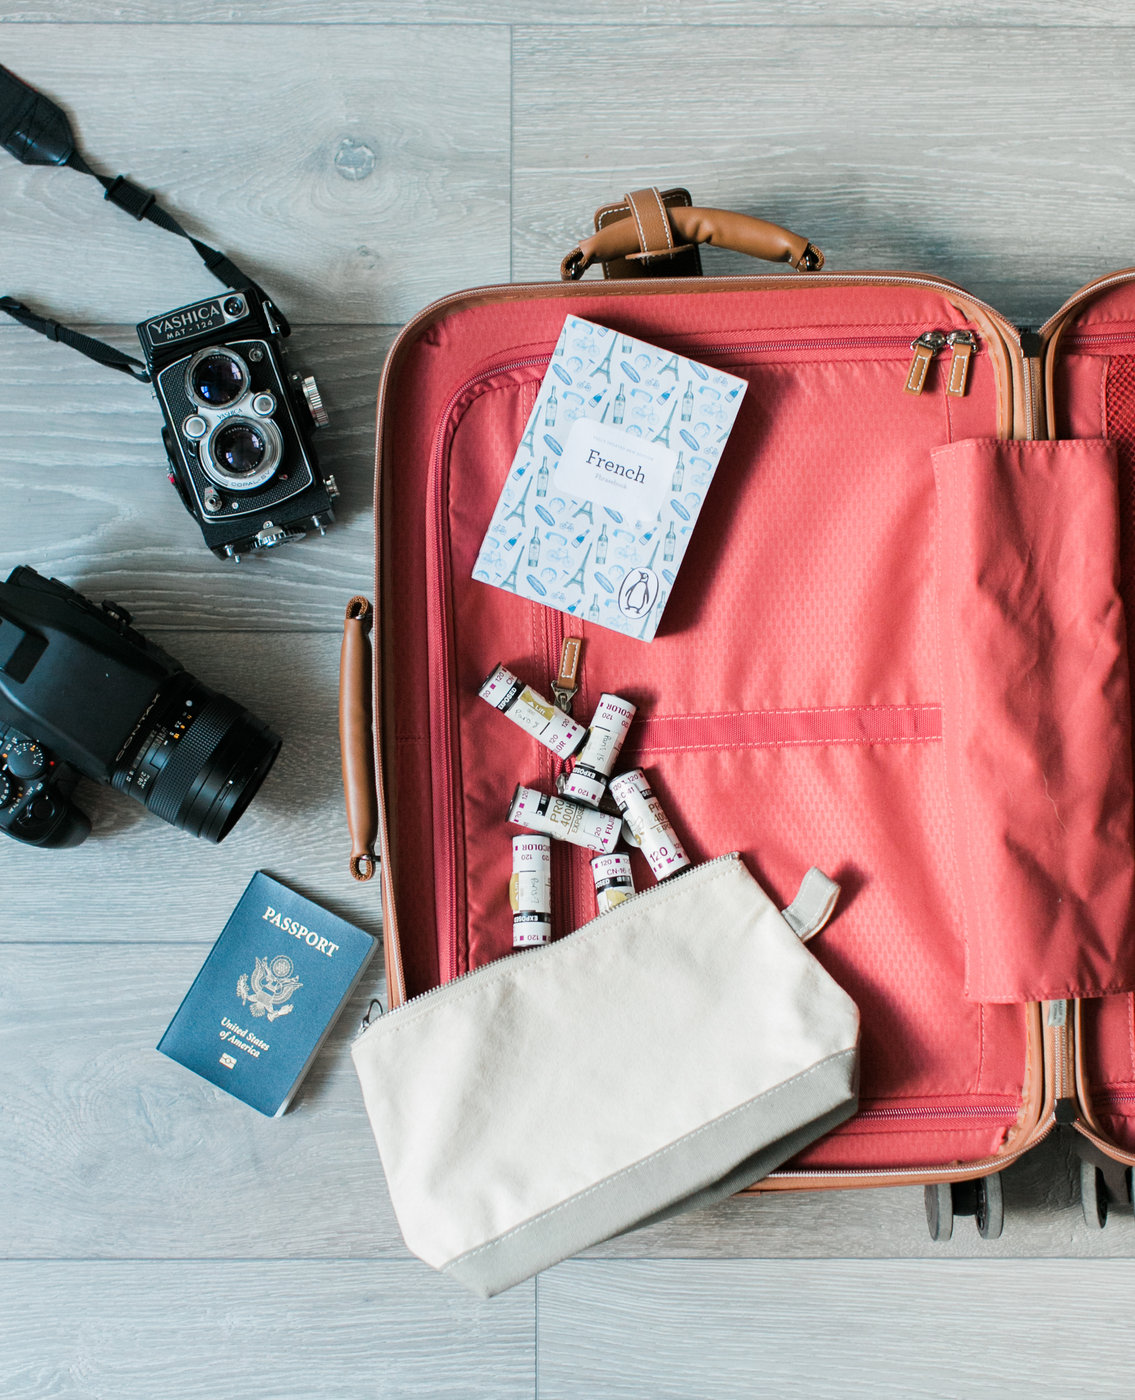 Travel hacks for photographers | Abby Grace Photography